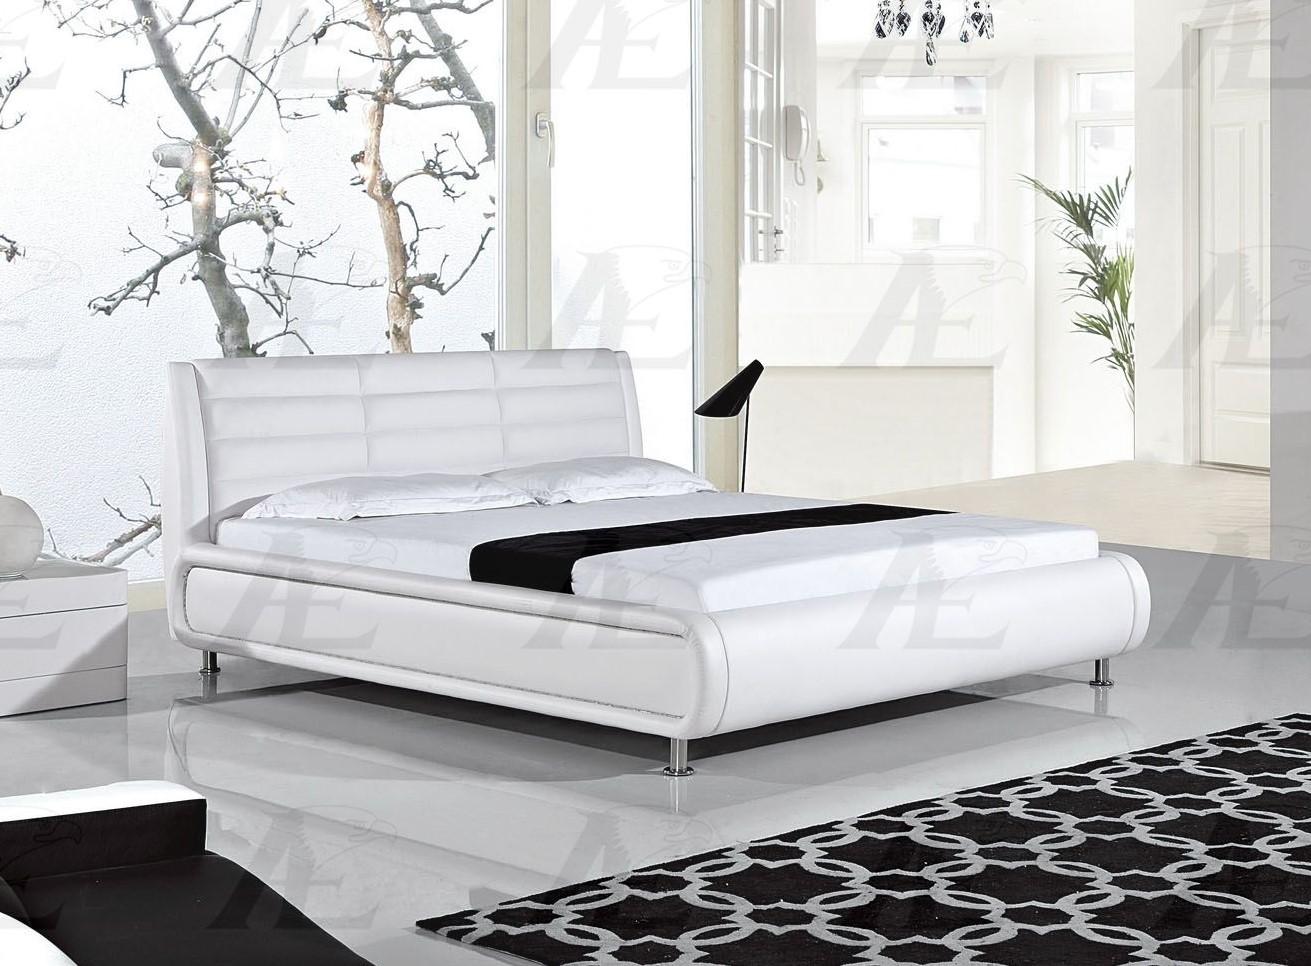 

    
White Faux Leather King Size Bed w/ LED Light American Eagle B-D019-W
